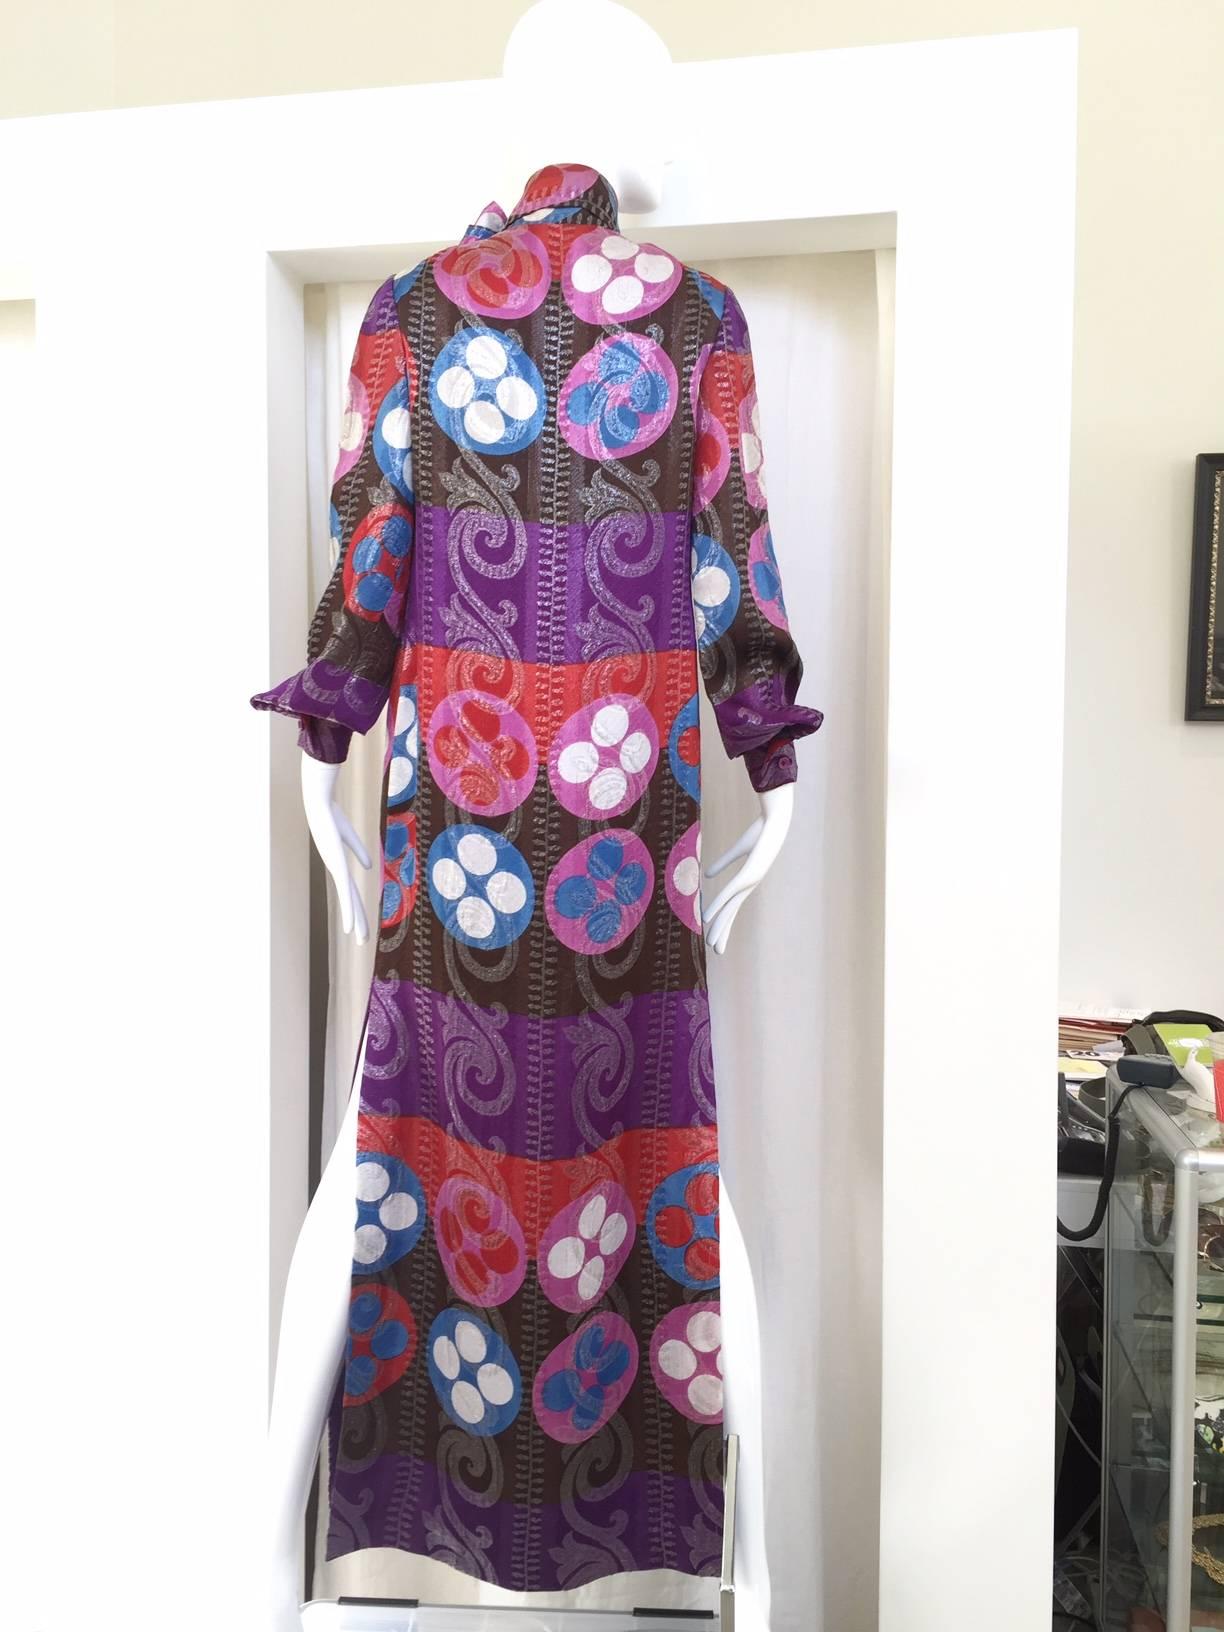 This 70s Lanvin silk kaftan gives the eye a gorgeous palate of color.  Purple, pink, red, blue, white and brown are mixed exquisitely in a geometric print, embellished with swirls of silver lurex thread that sparkles and softens the geometric